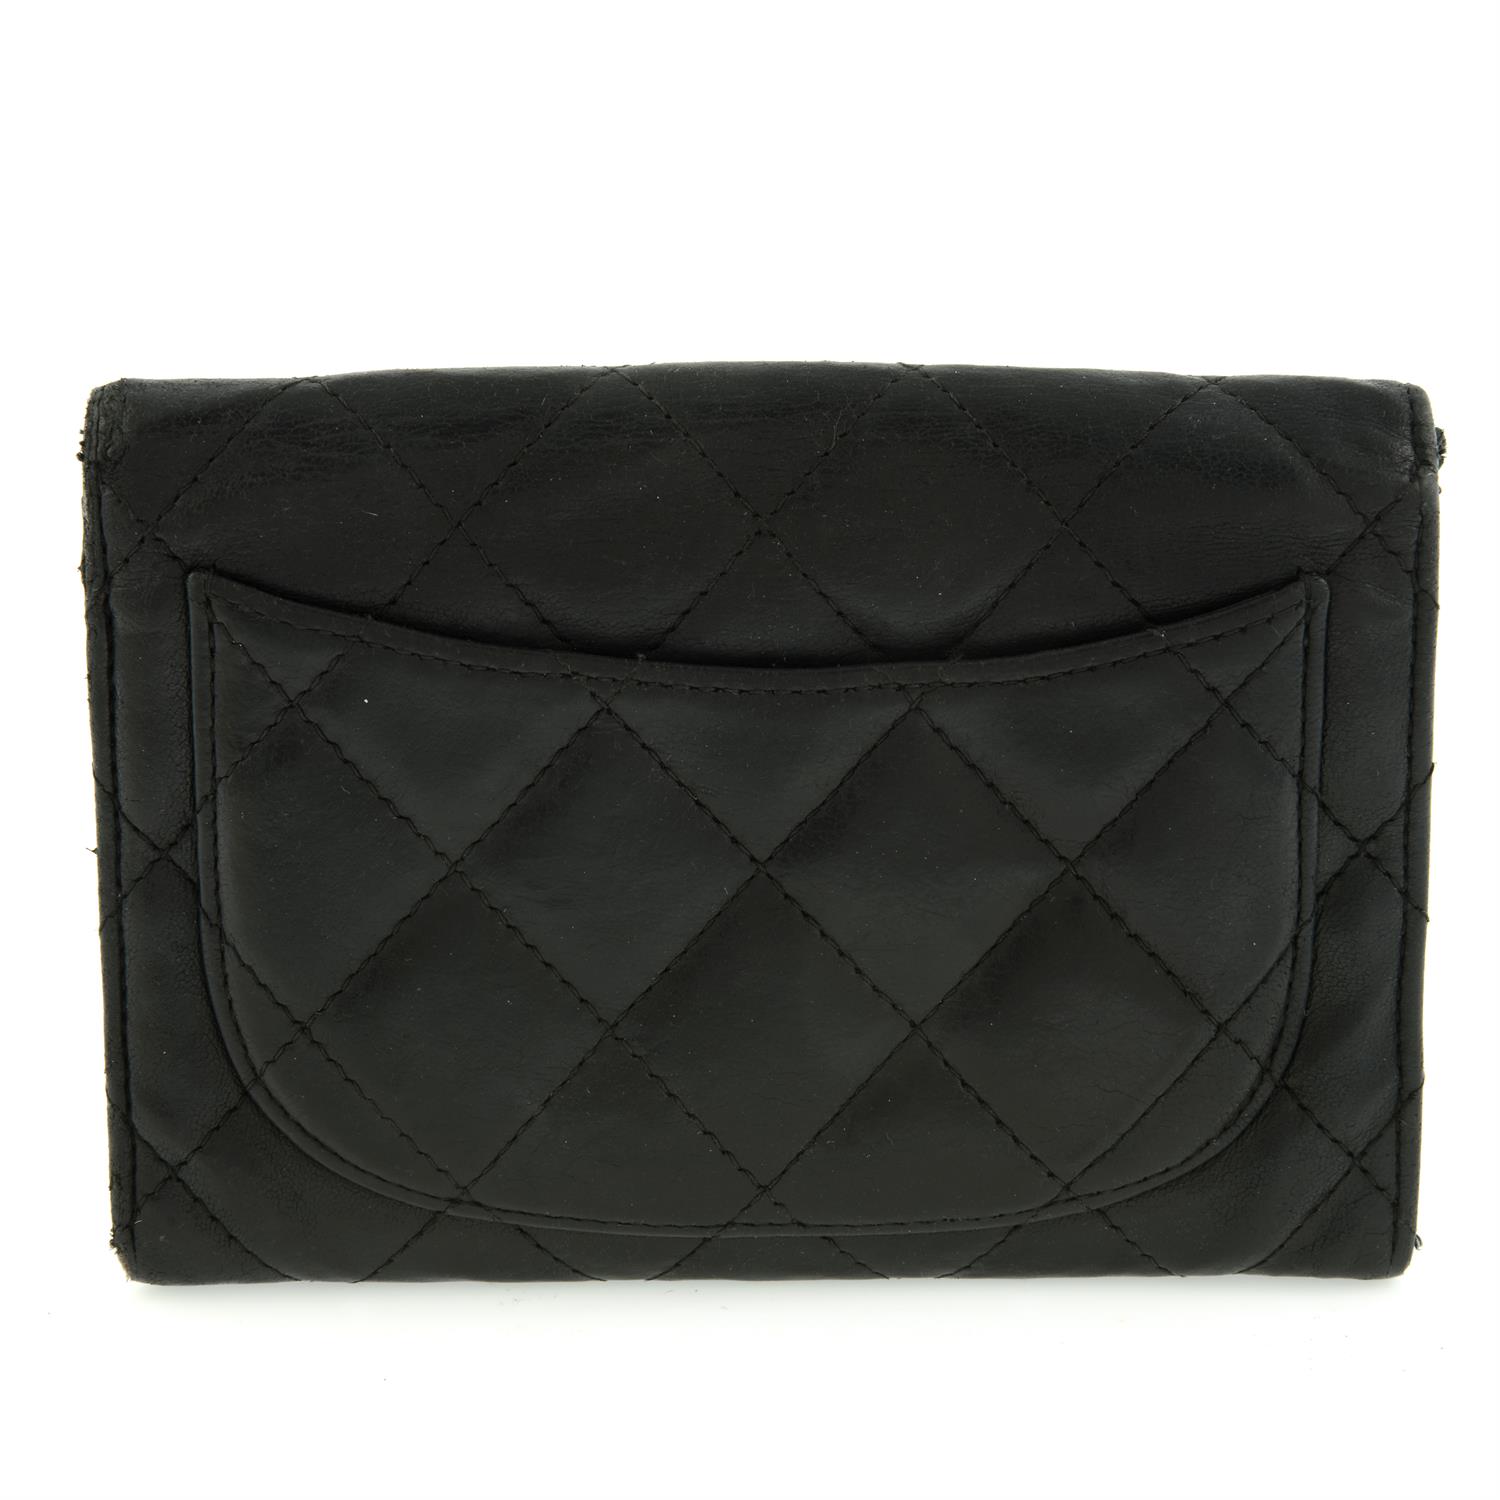 Chanel - CC quilted Flap wallet. - Image 2 of 3